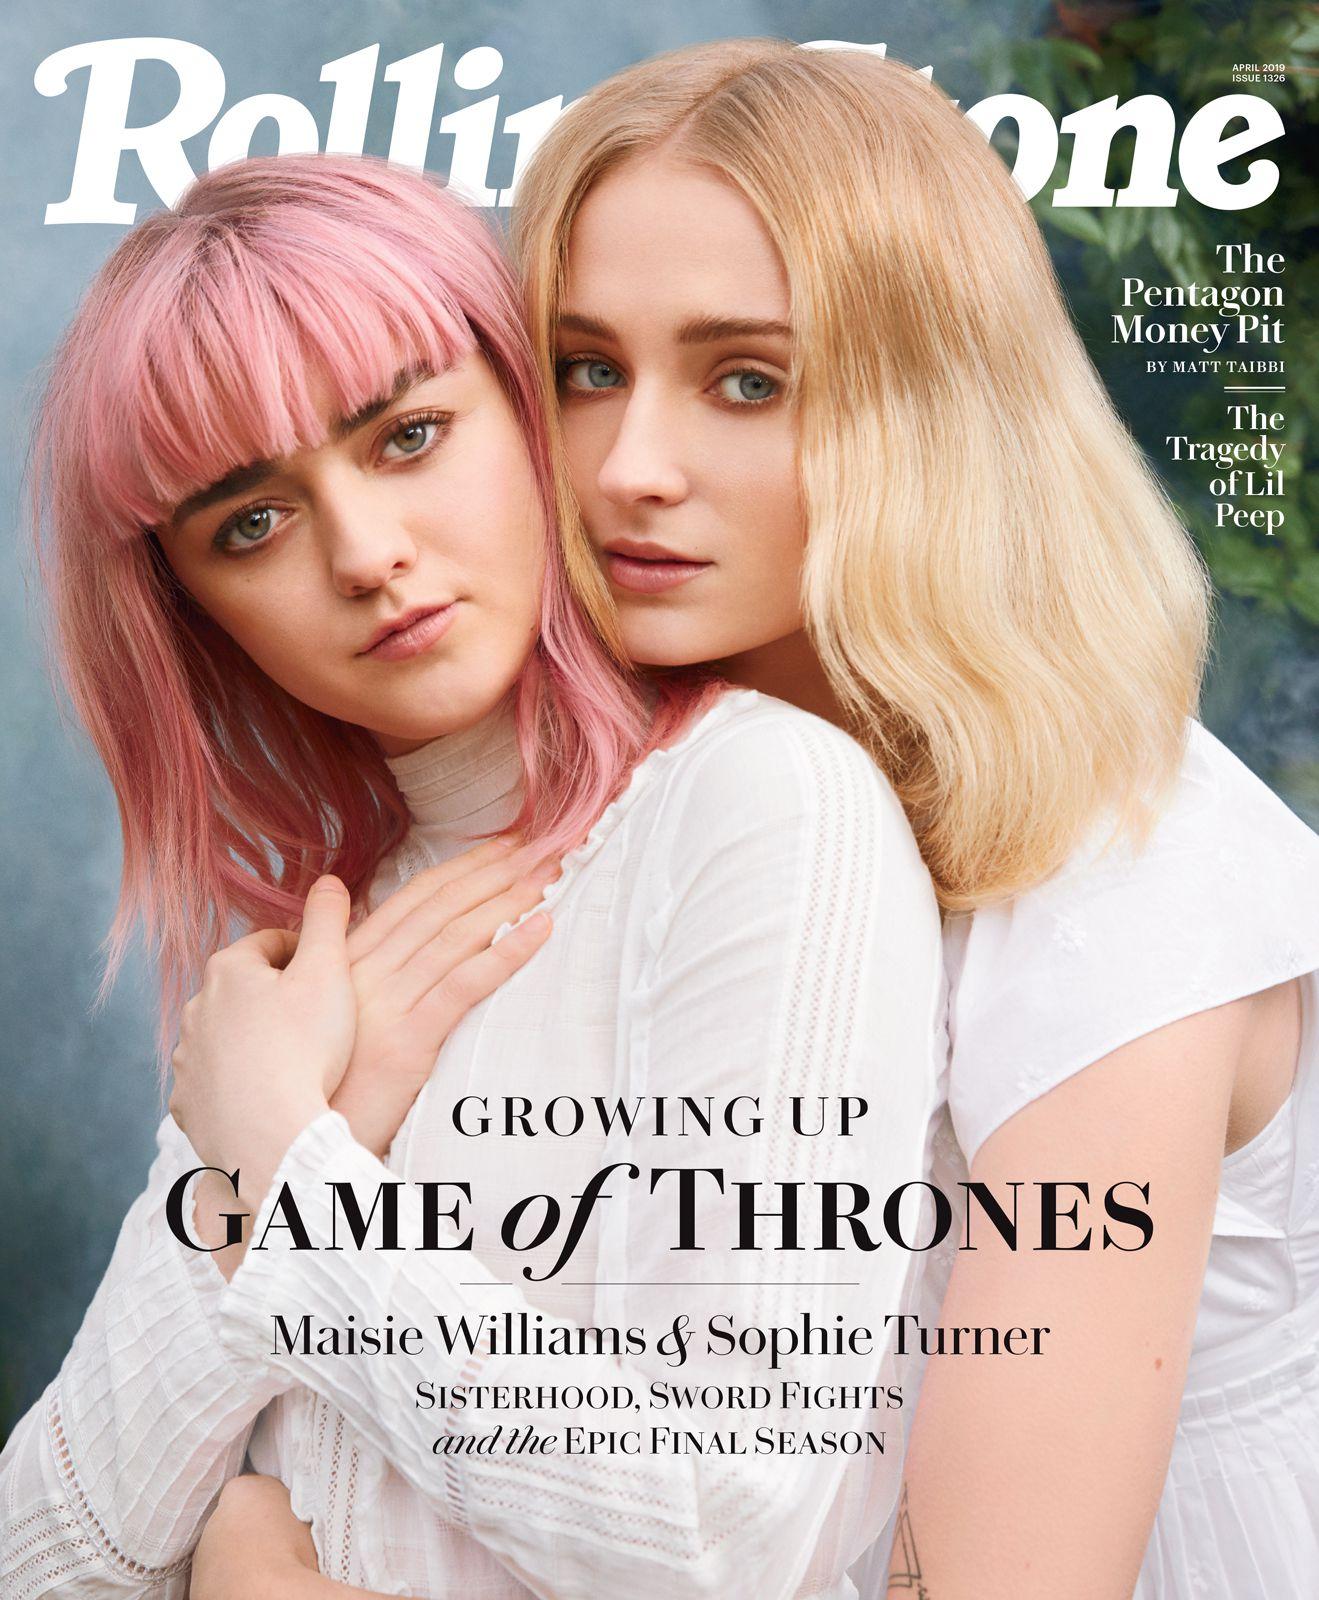 Iconic Maisie Williams and Sophie Turner Photors